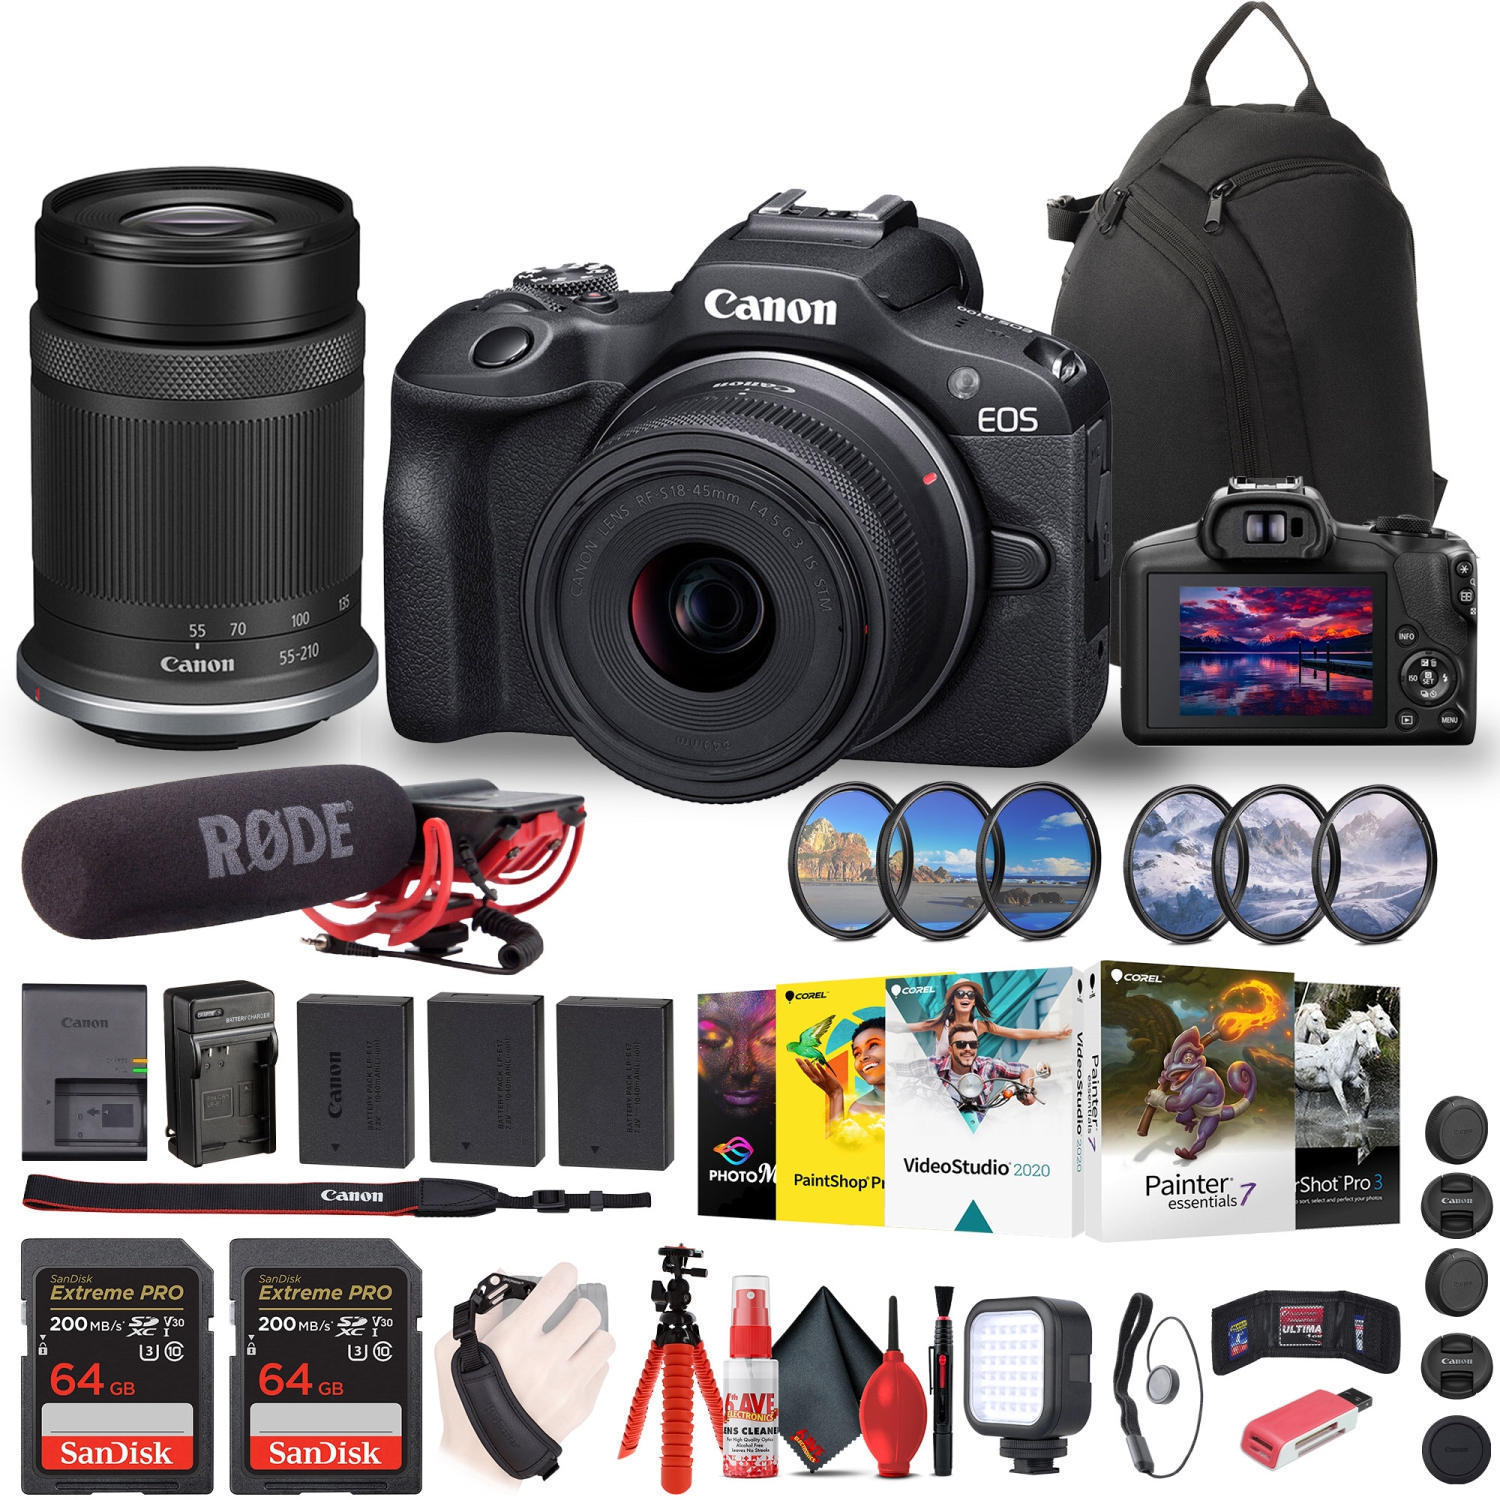 Canon EOS R100 Mirrorless Camera with 18-45mm and 55-210mm Lenses Kit (6052C022) + Rode VideoMic + Filter Kit + Sling BackPack + Corel Photo Software + 2 x 64GB Card + 2 x LPE17 Ba